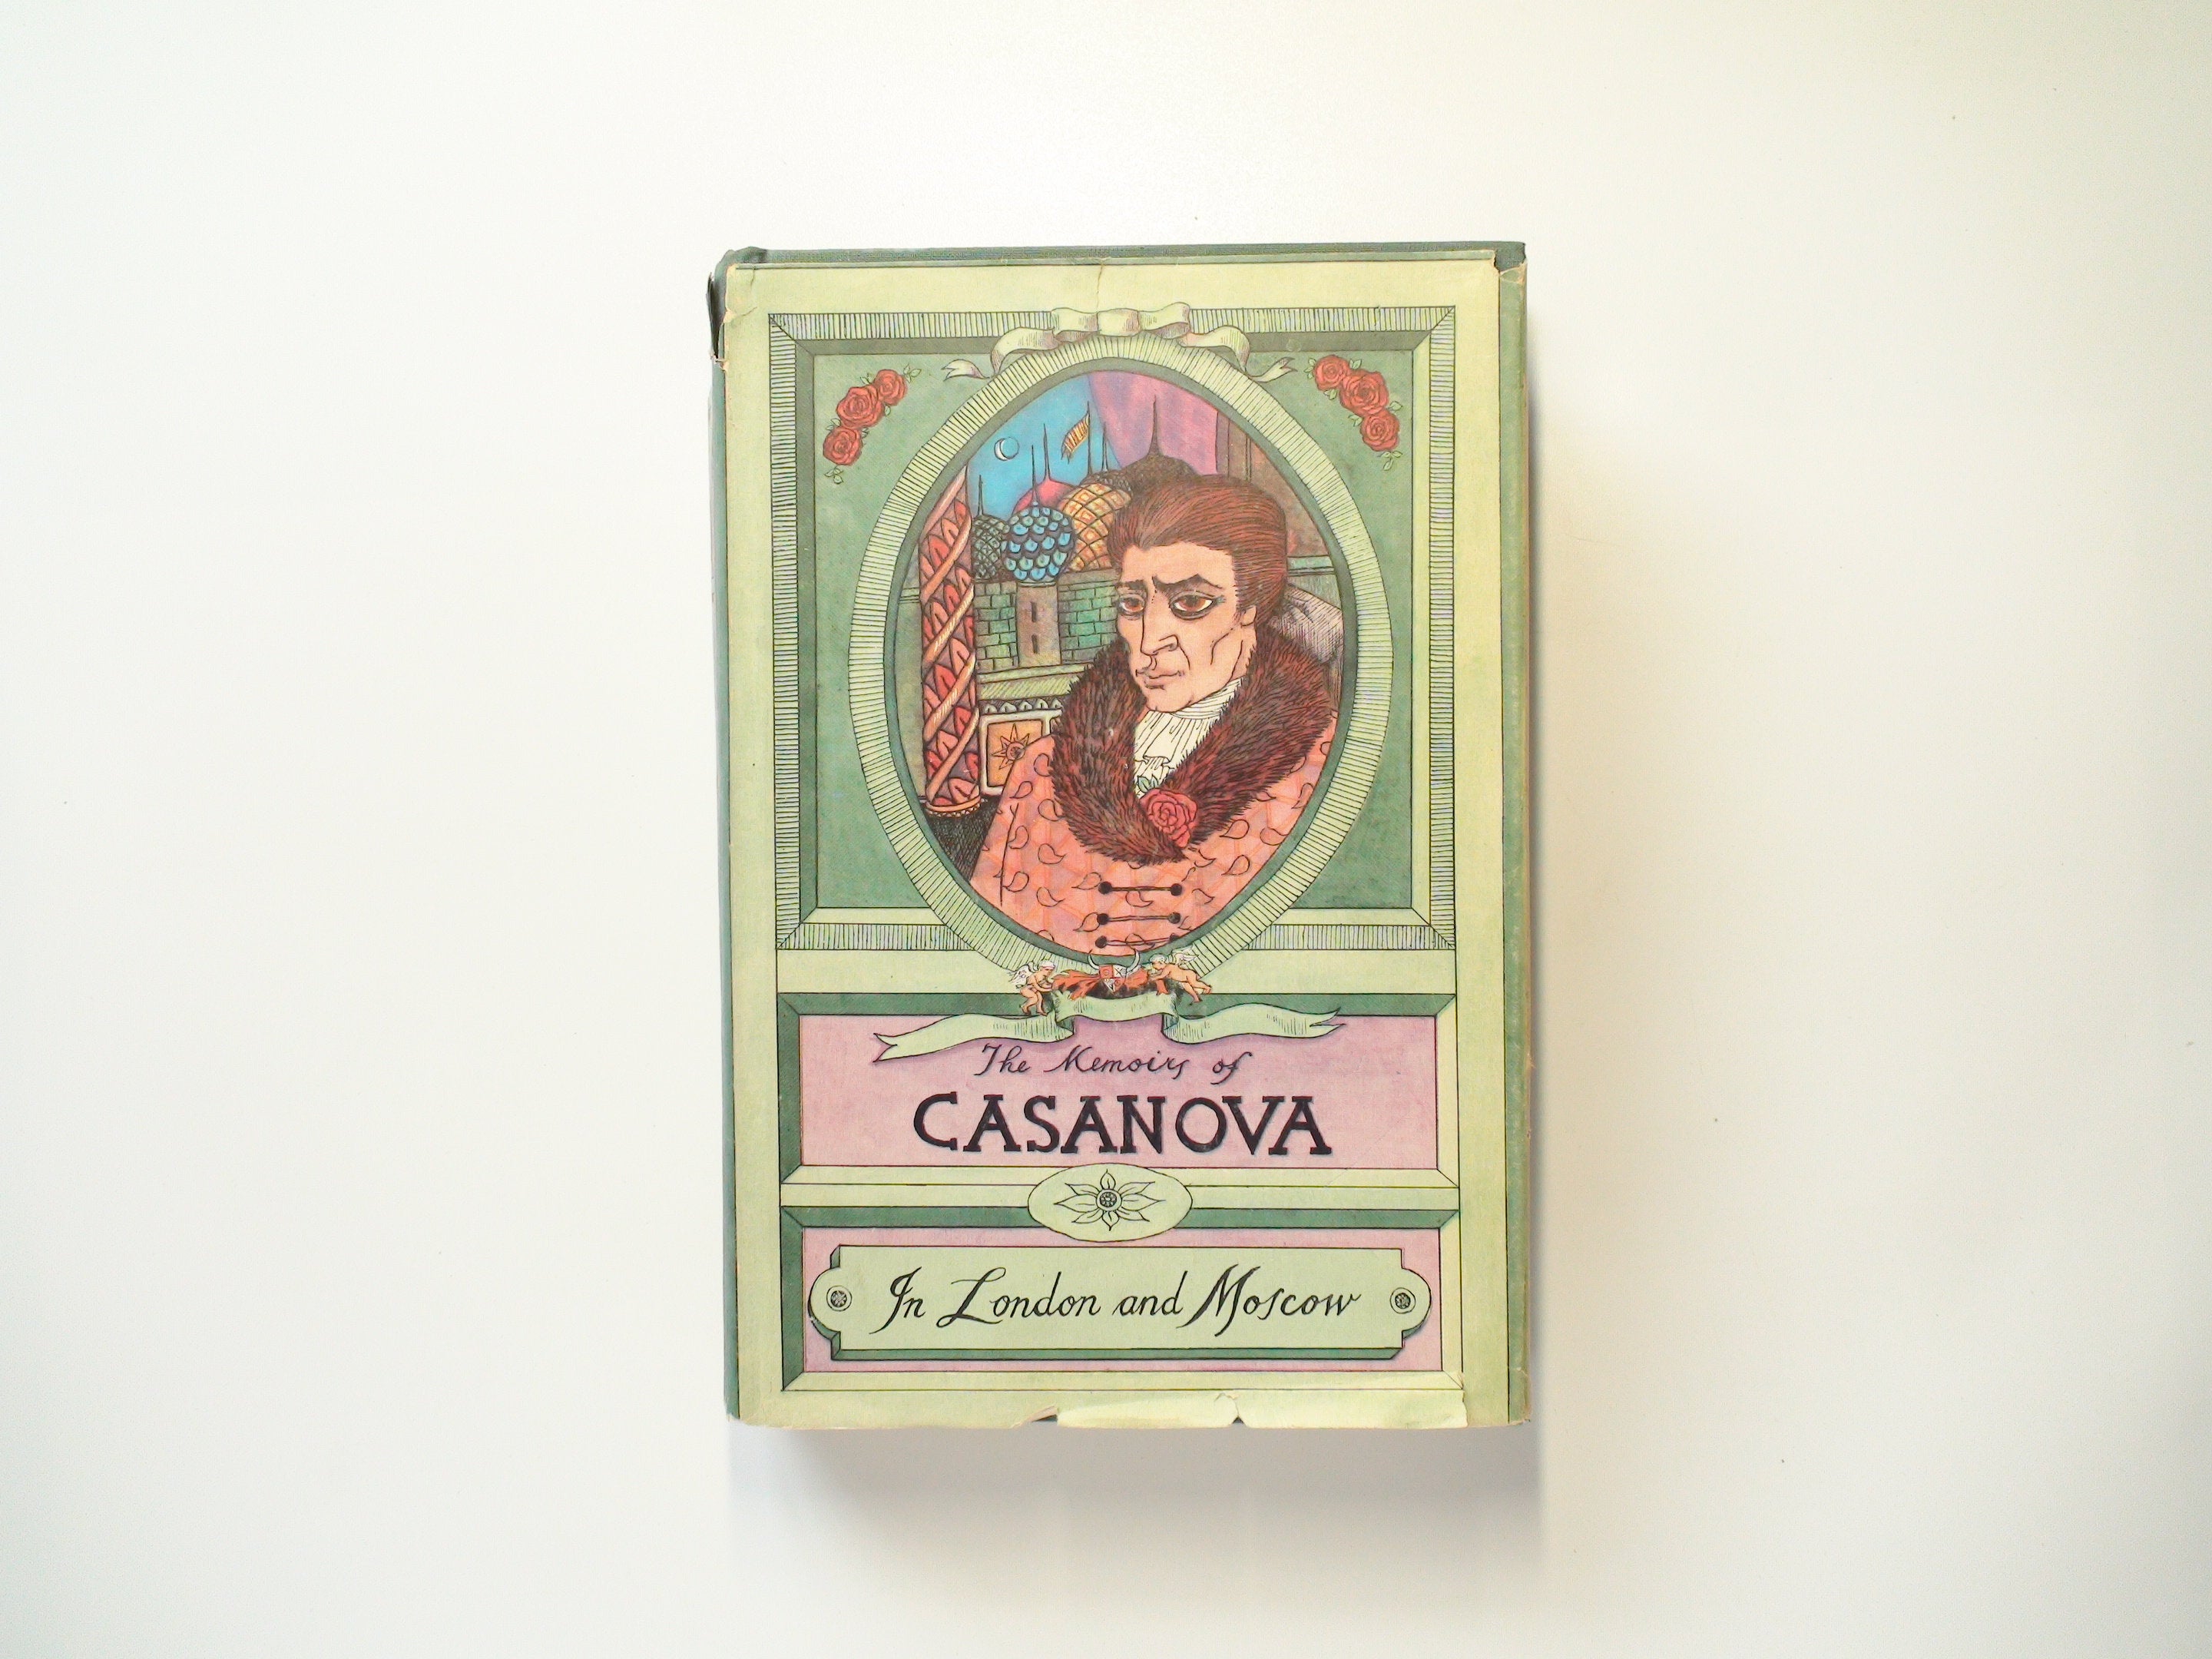 Memoirs of Jacques Casanova, In London and Moscow, Vol 5, Arthur Machen, 1947